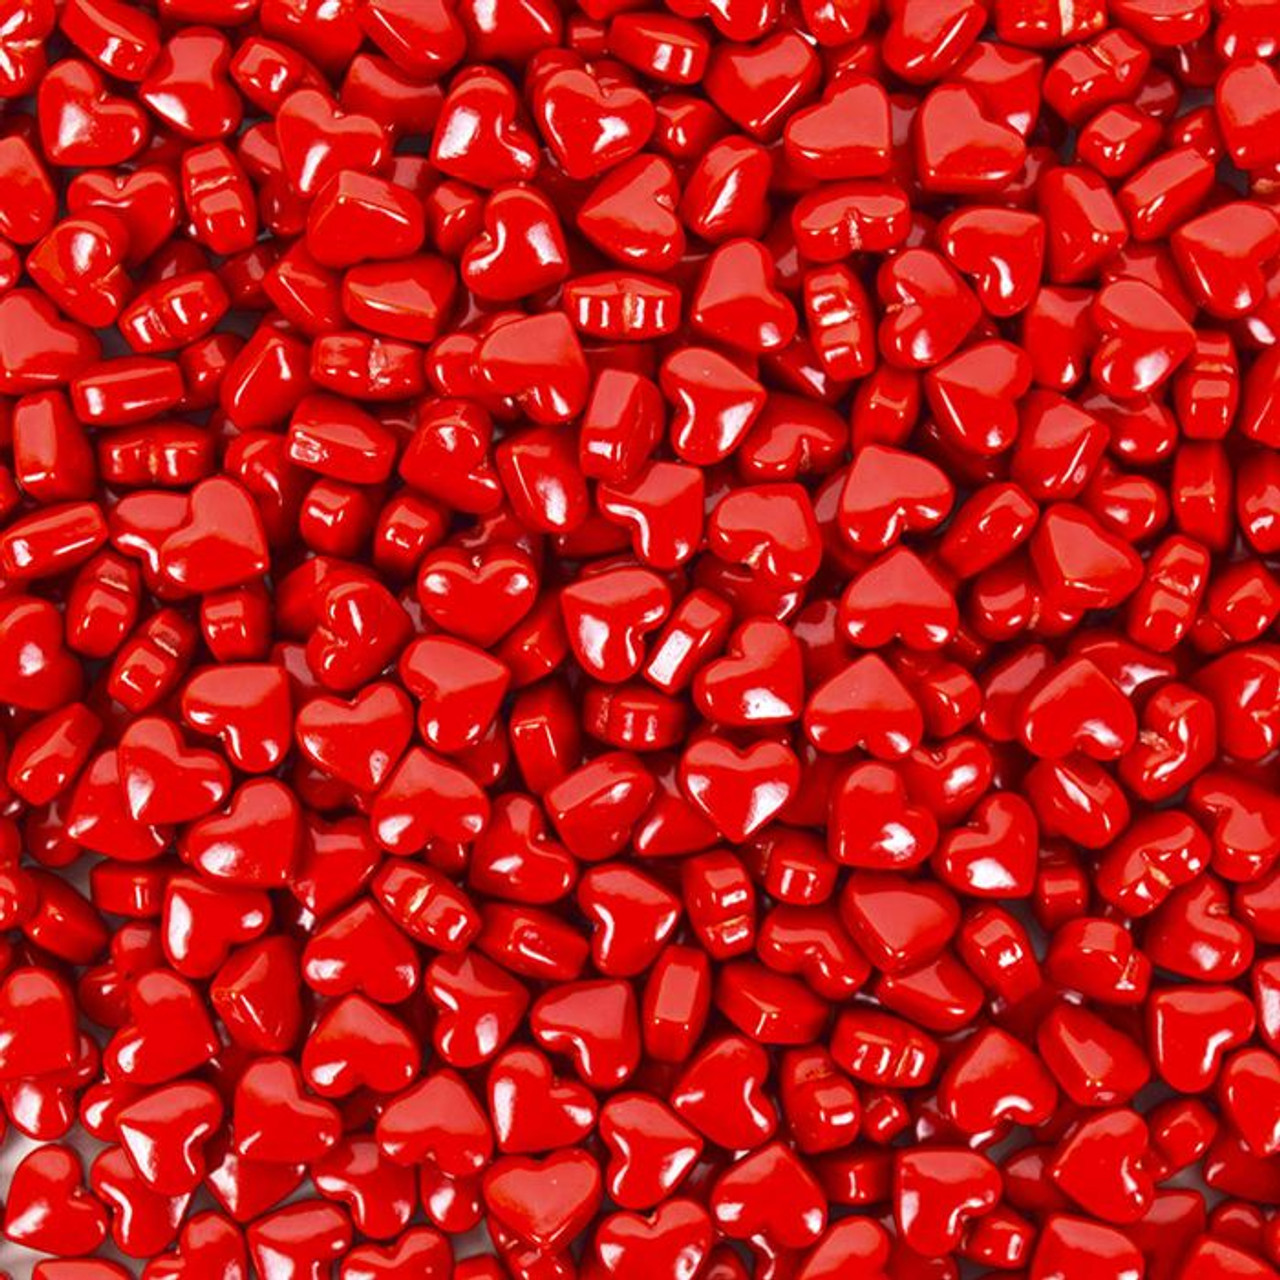 Red Hot Cinnamon Candy Hearts - Dukes and Duchesses